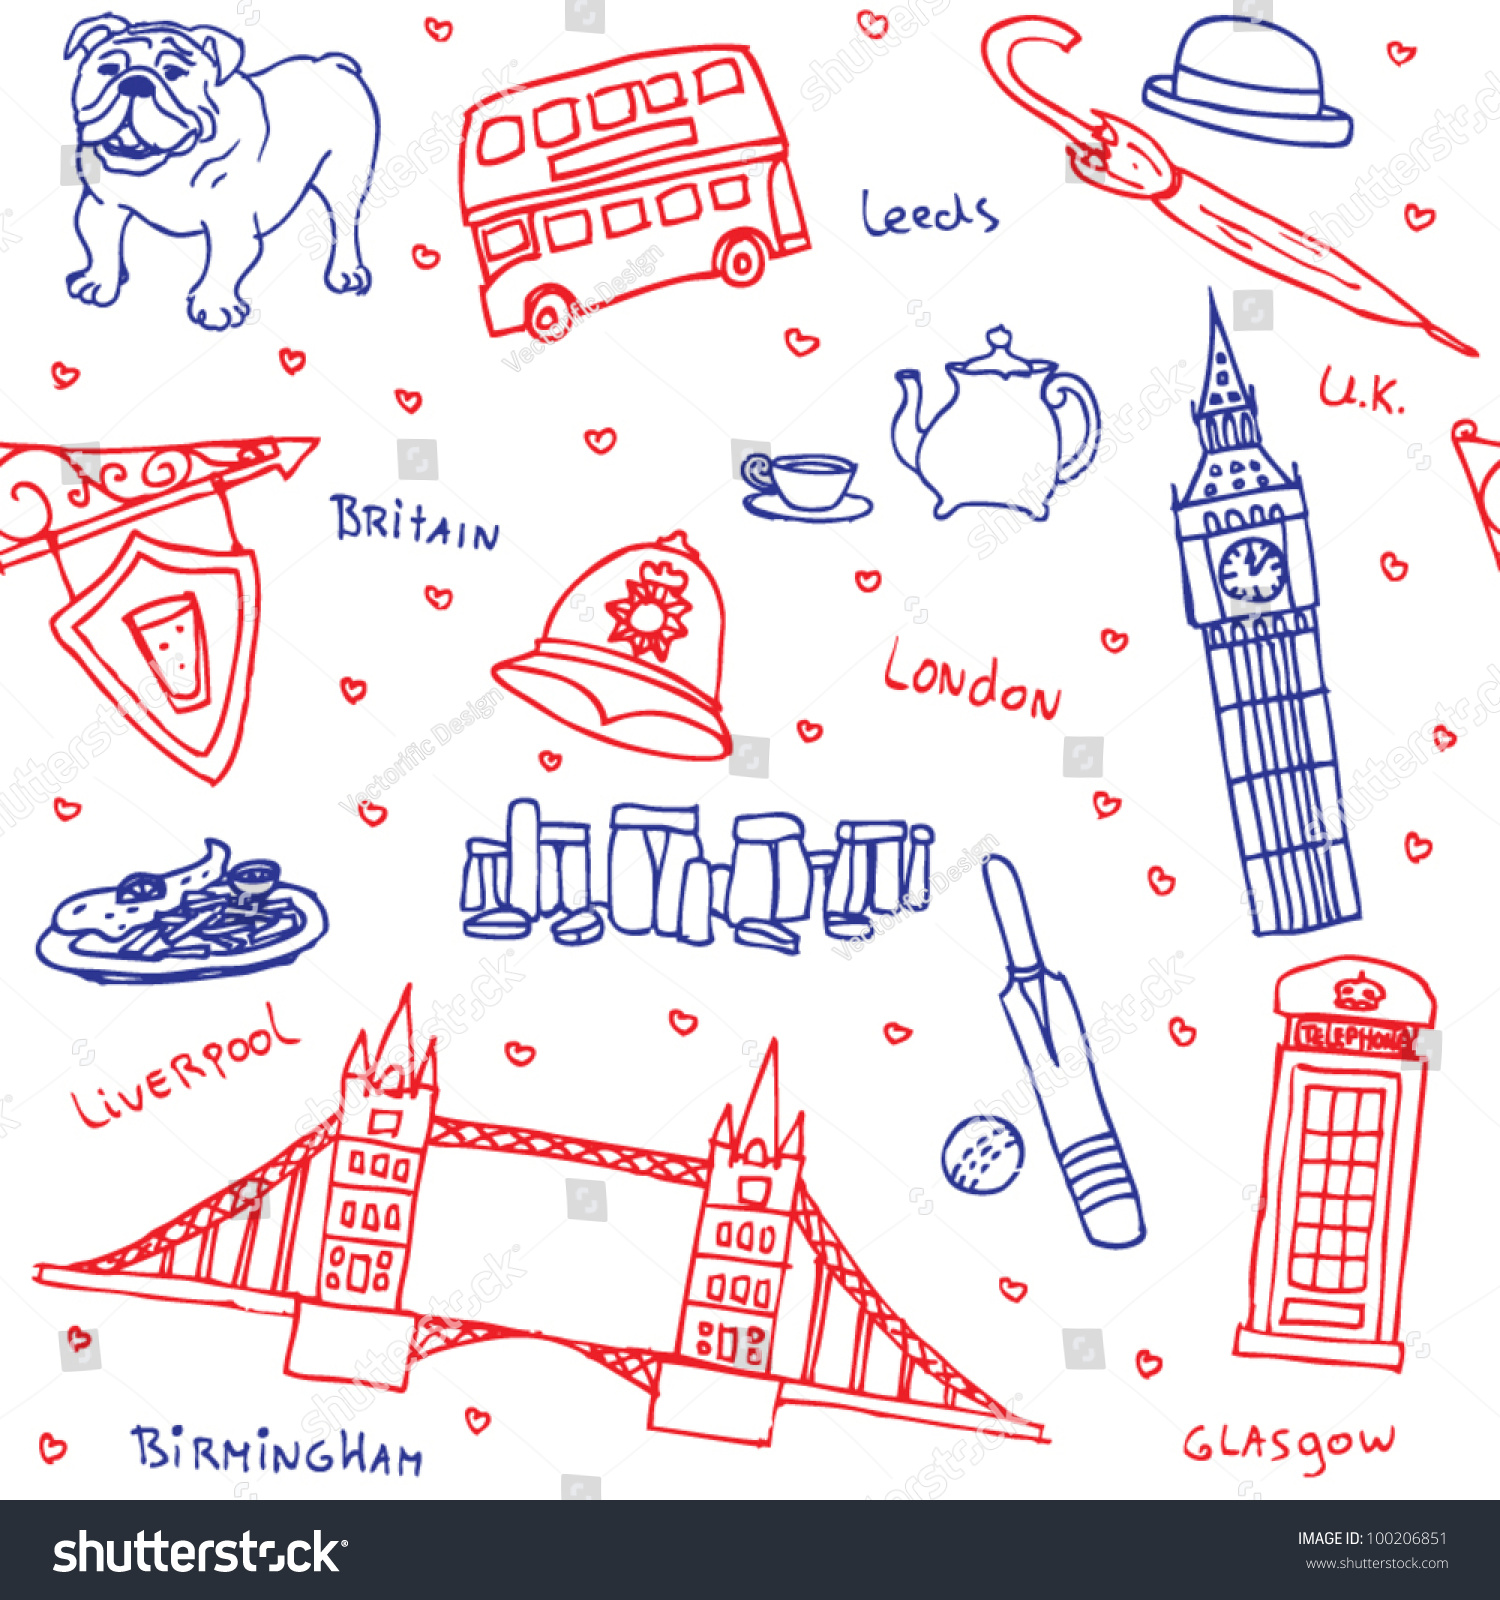 british clipart collection - photo #12